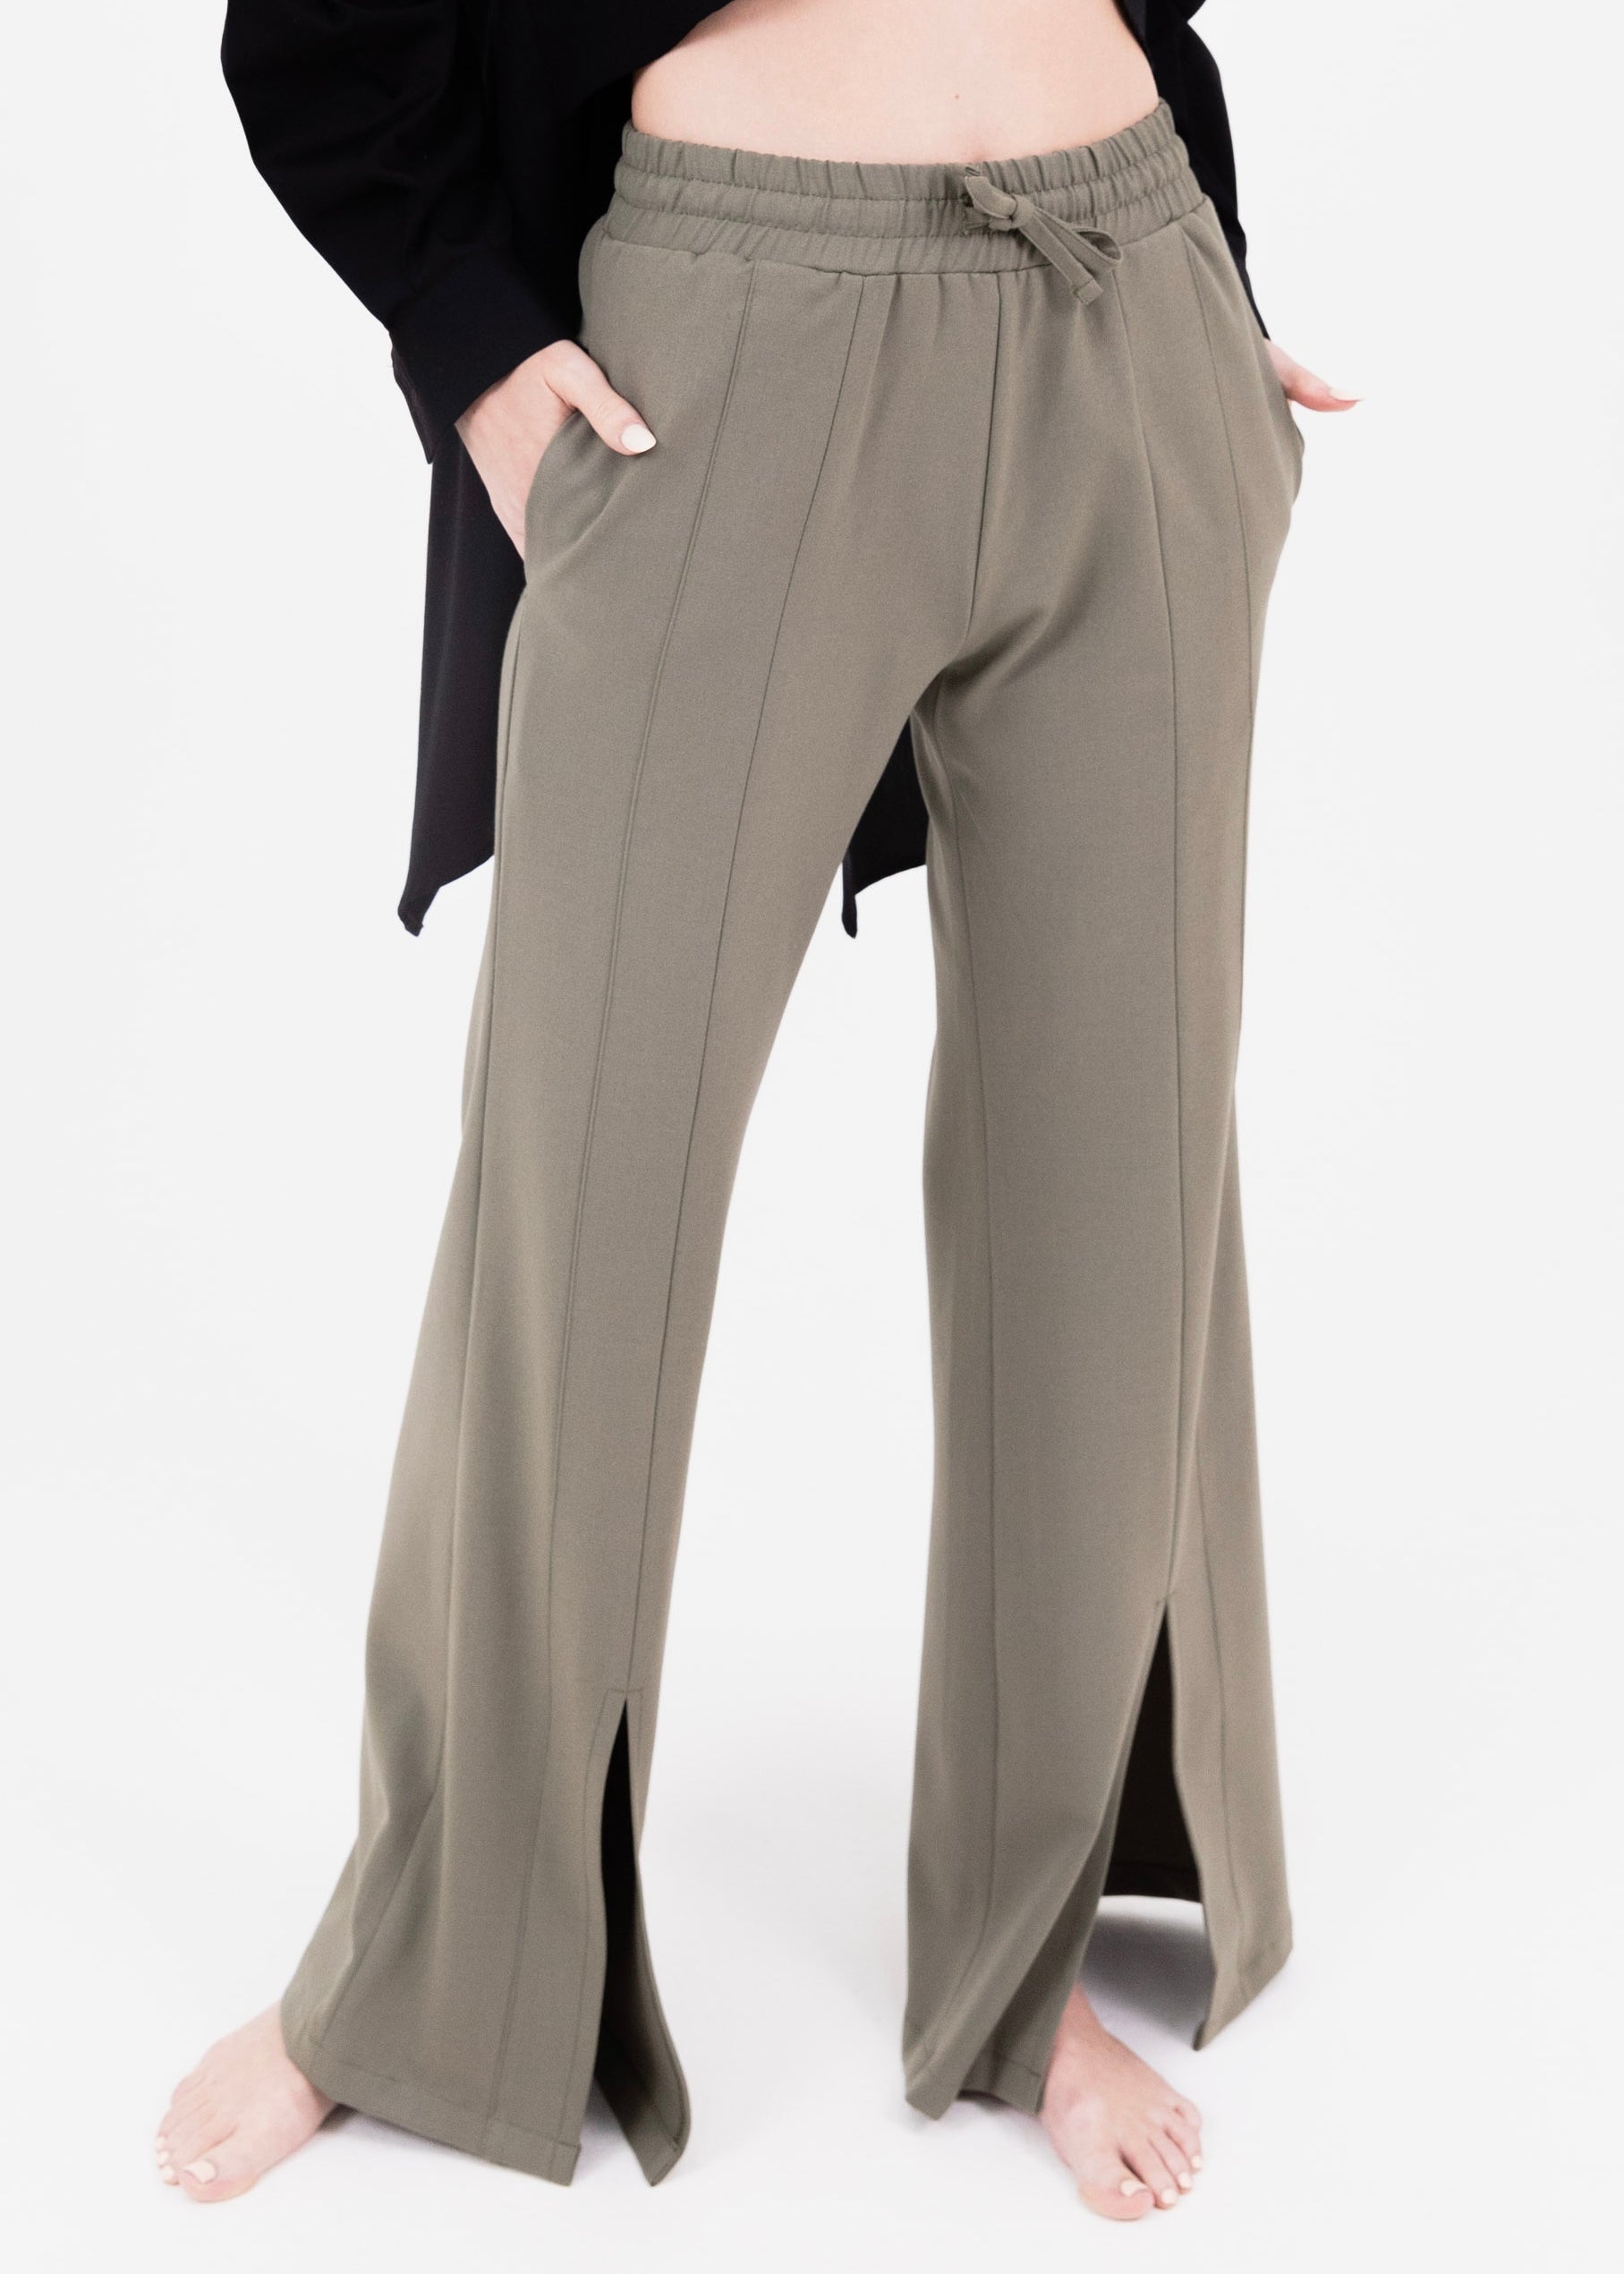 Must Have Olive Pants